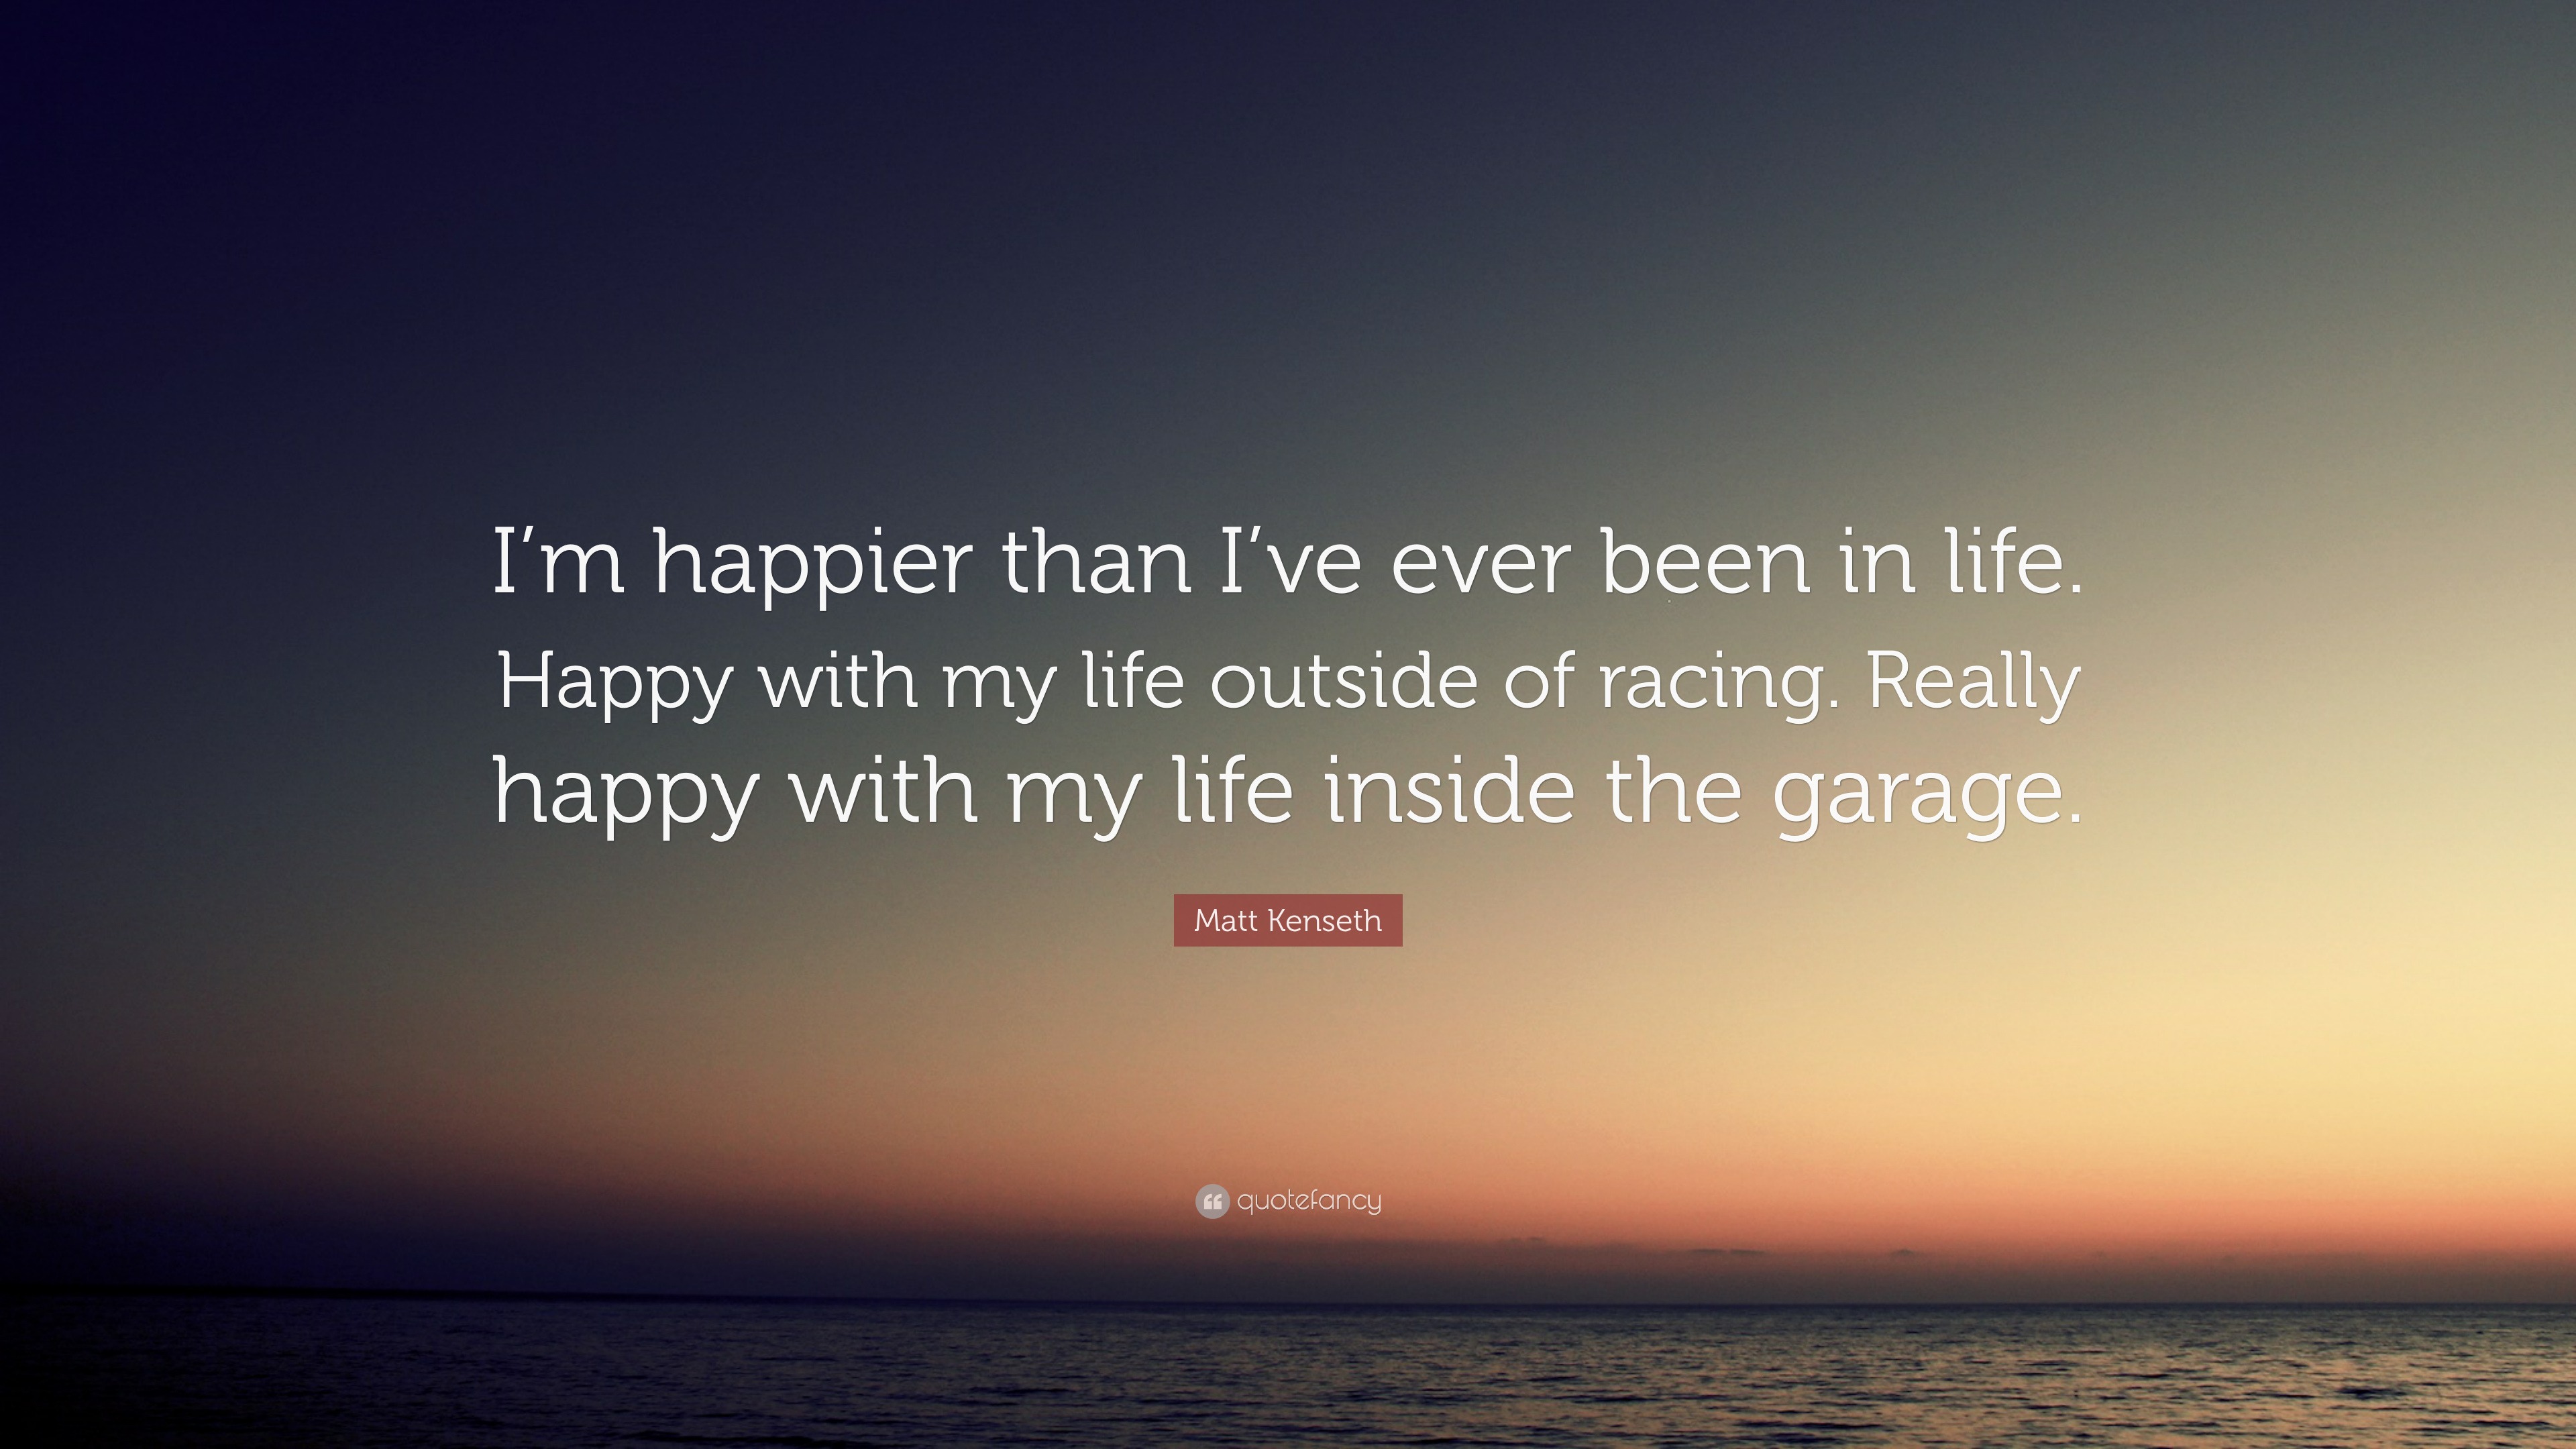 Matt Kenseth Quote I M Happier Than I Ve Ever Been In Life Happy With My Life Outside Of Racing Really Happy With My Life Inside The Gara